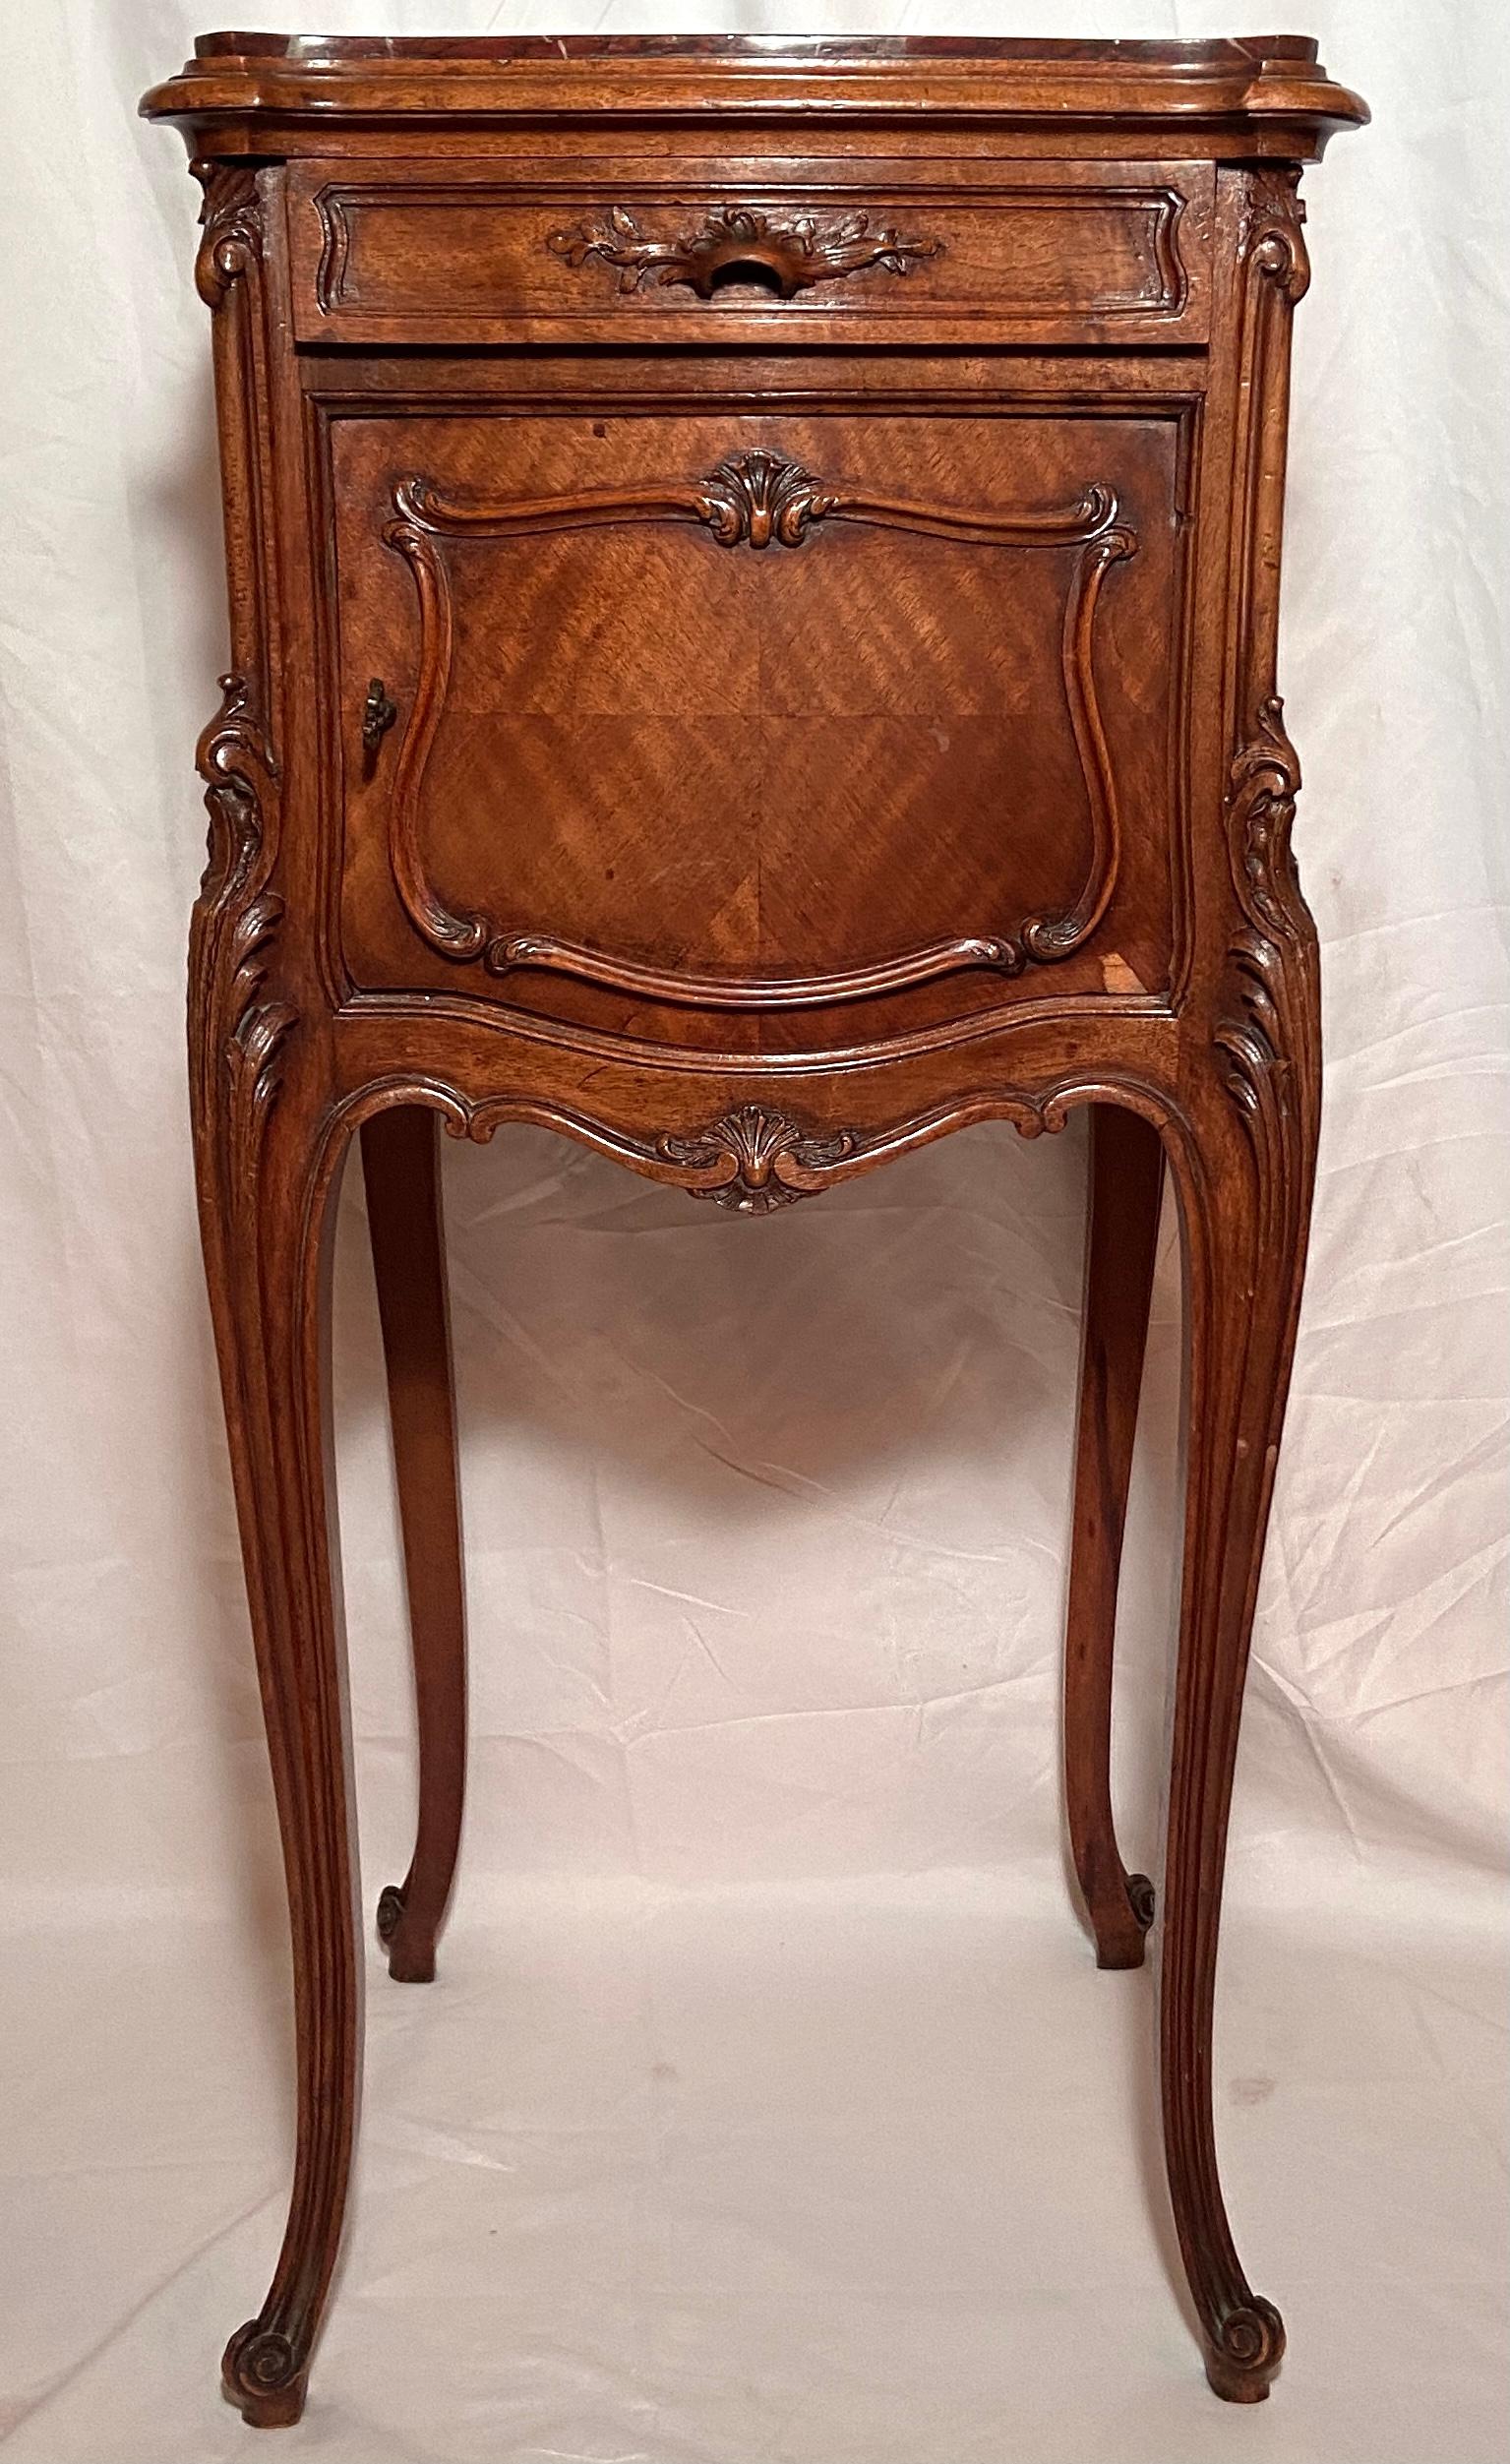 Pair antique french rosewood and rouge marble-top bedside tables, Circa 1870. Listed as bedside tables, this pair of tables could also flank a sofa, or be placed separately in the home: options are endless!